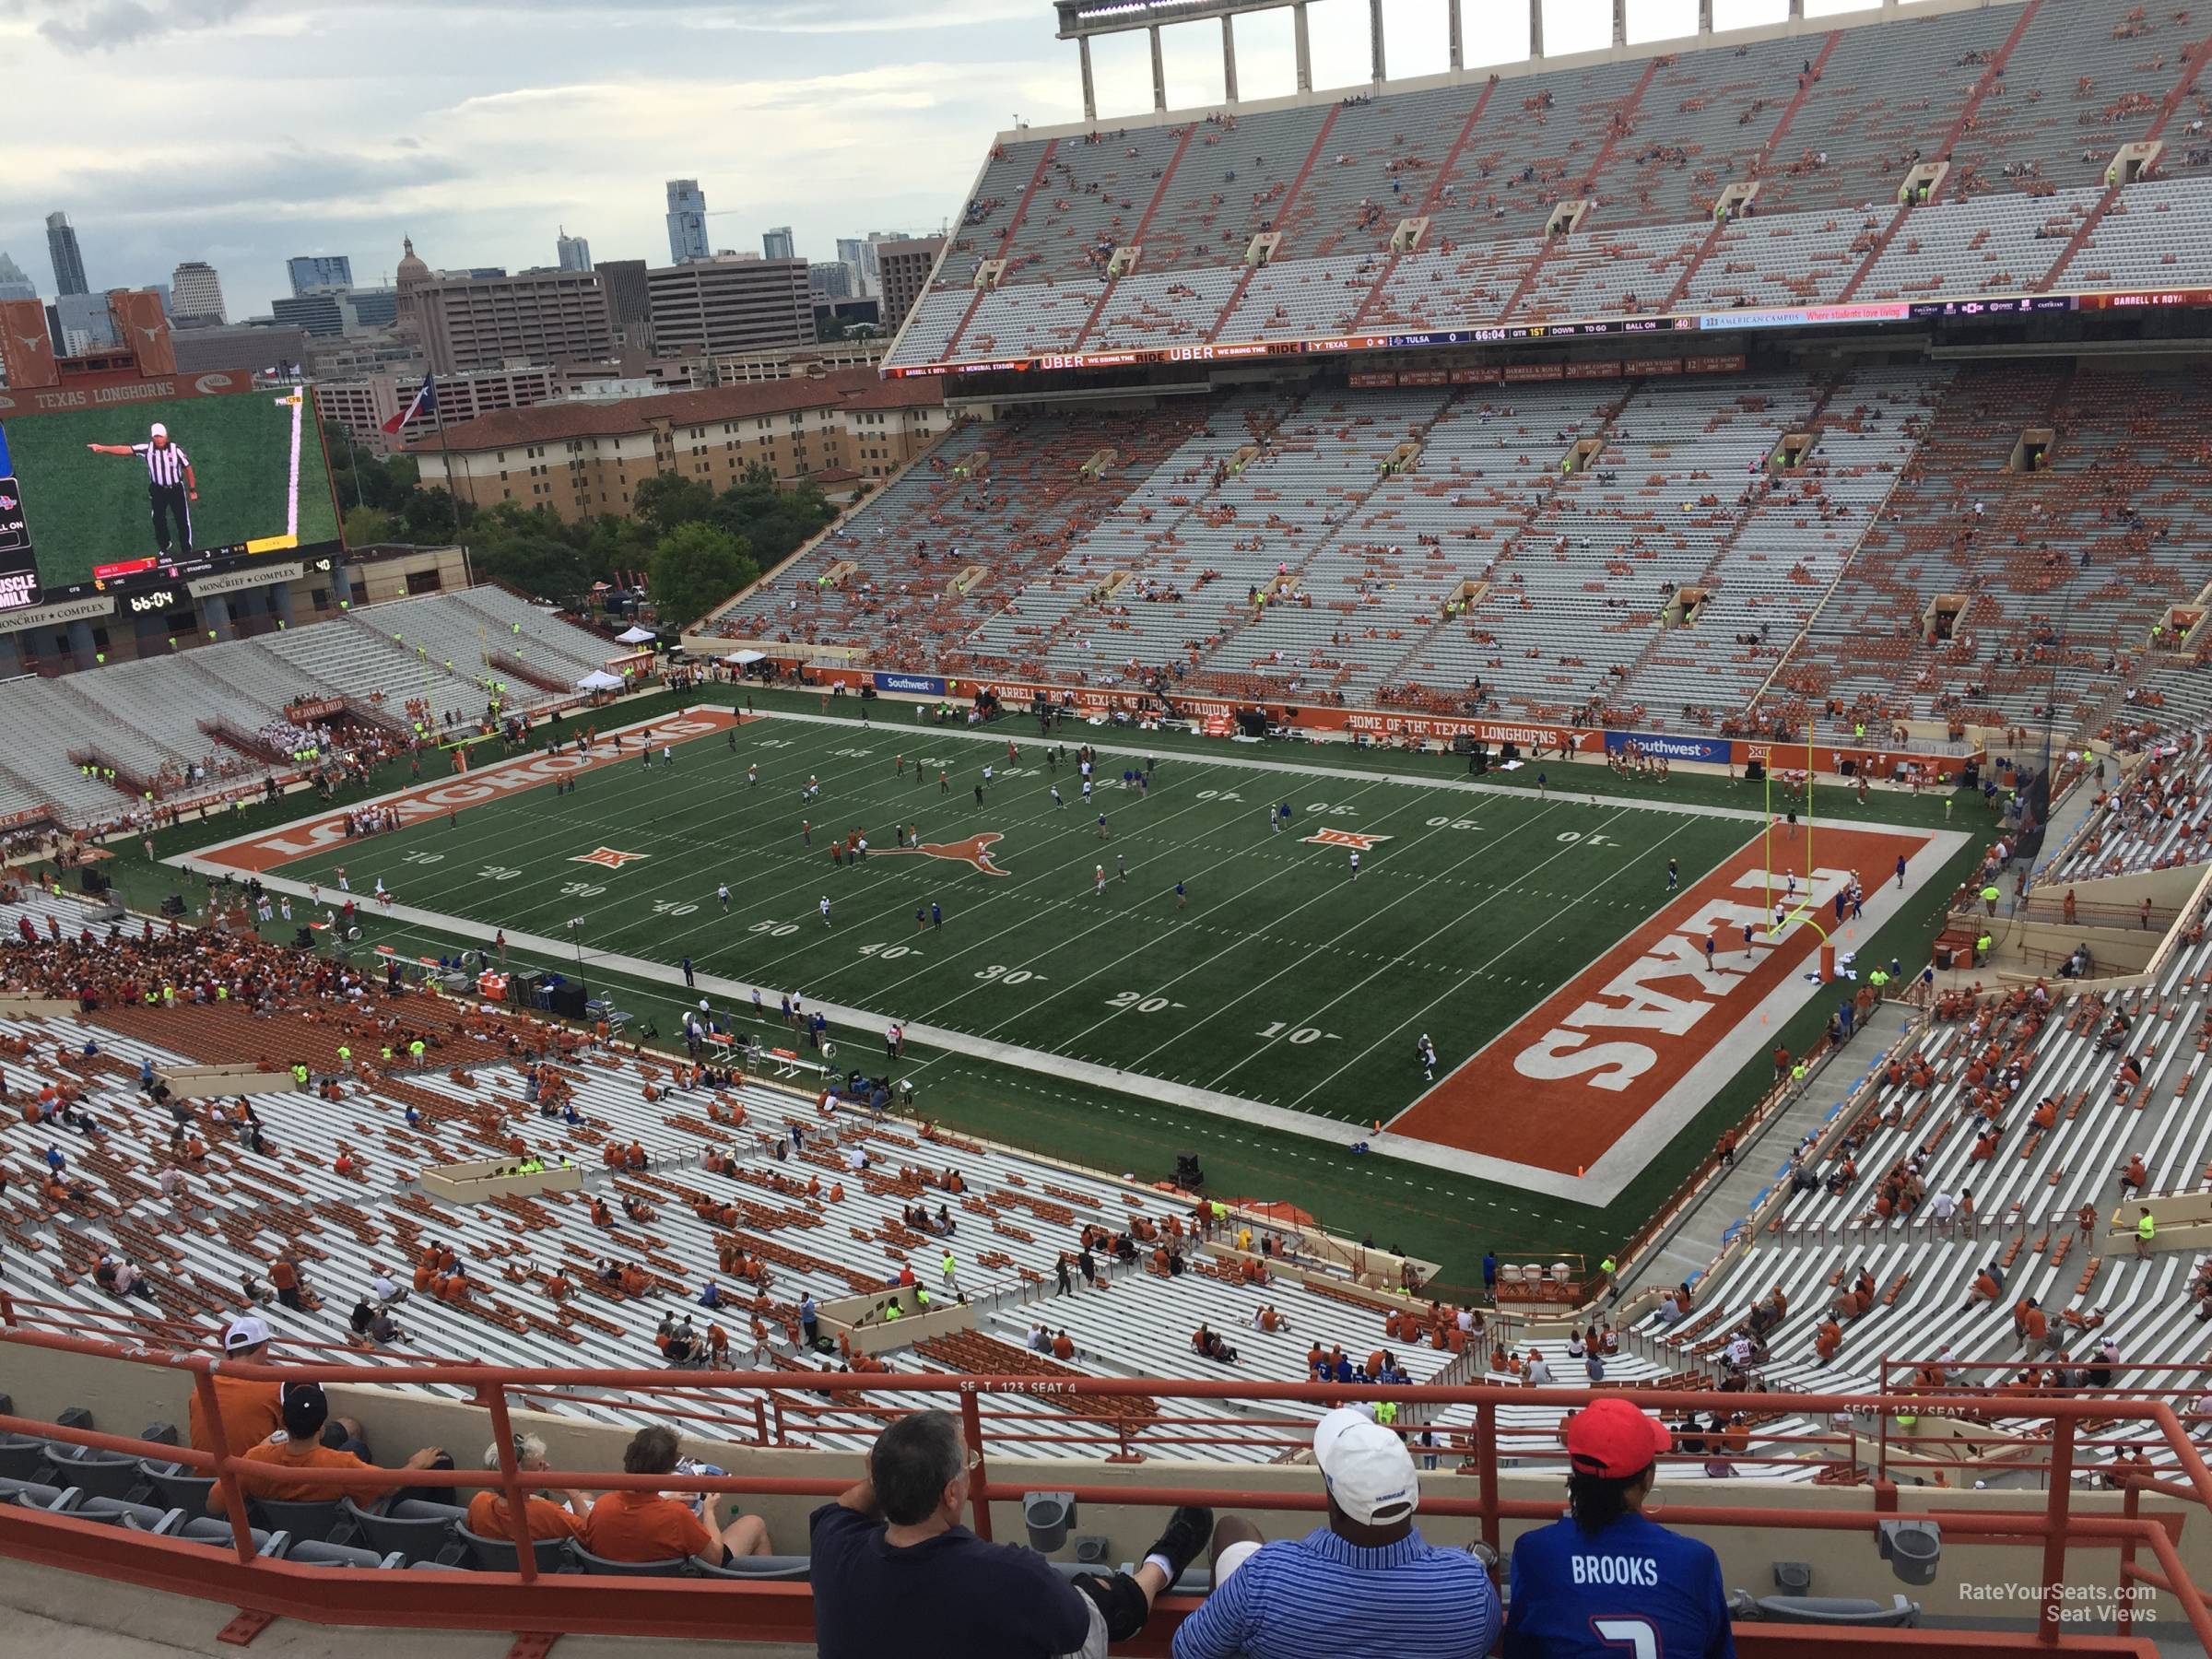 section 123, row 10 seat view  - dkr-texas memorial stadium